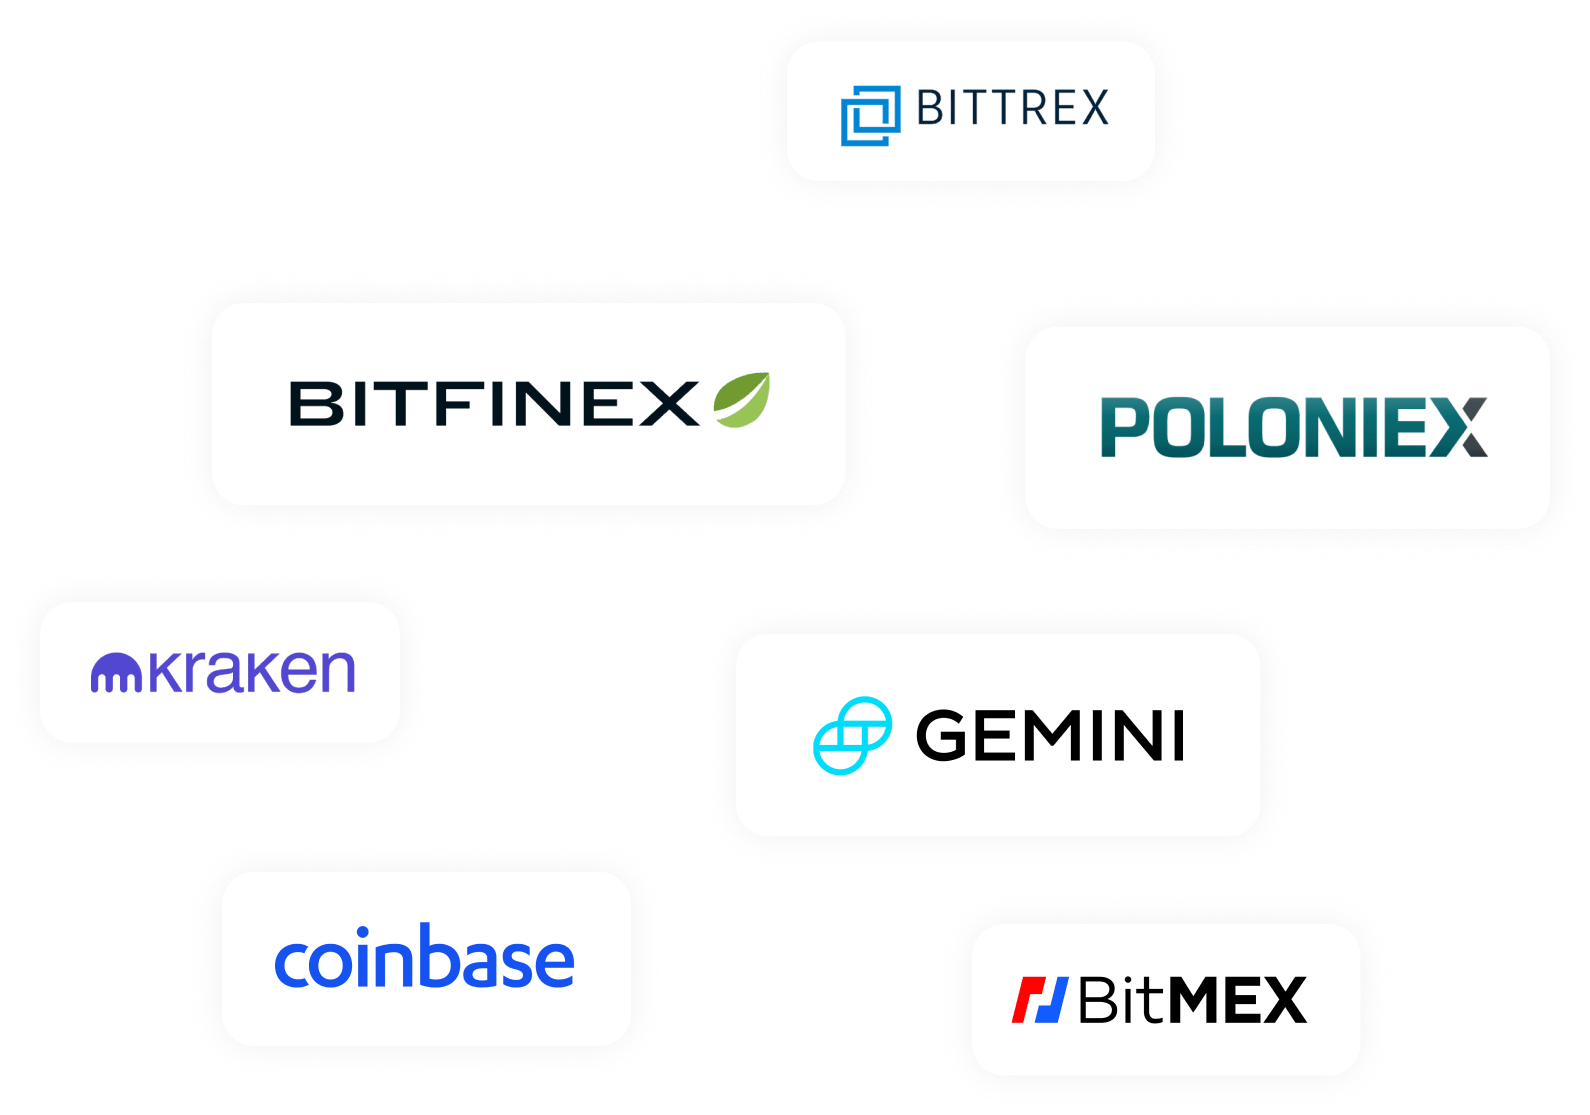 Supported Exchanges